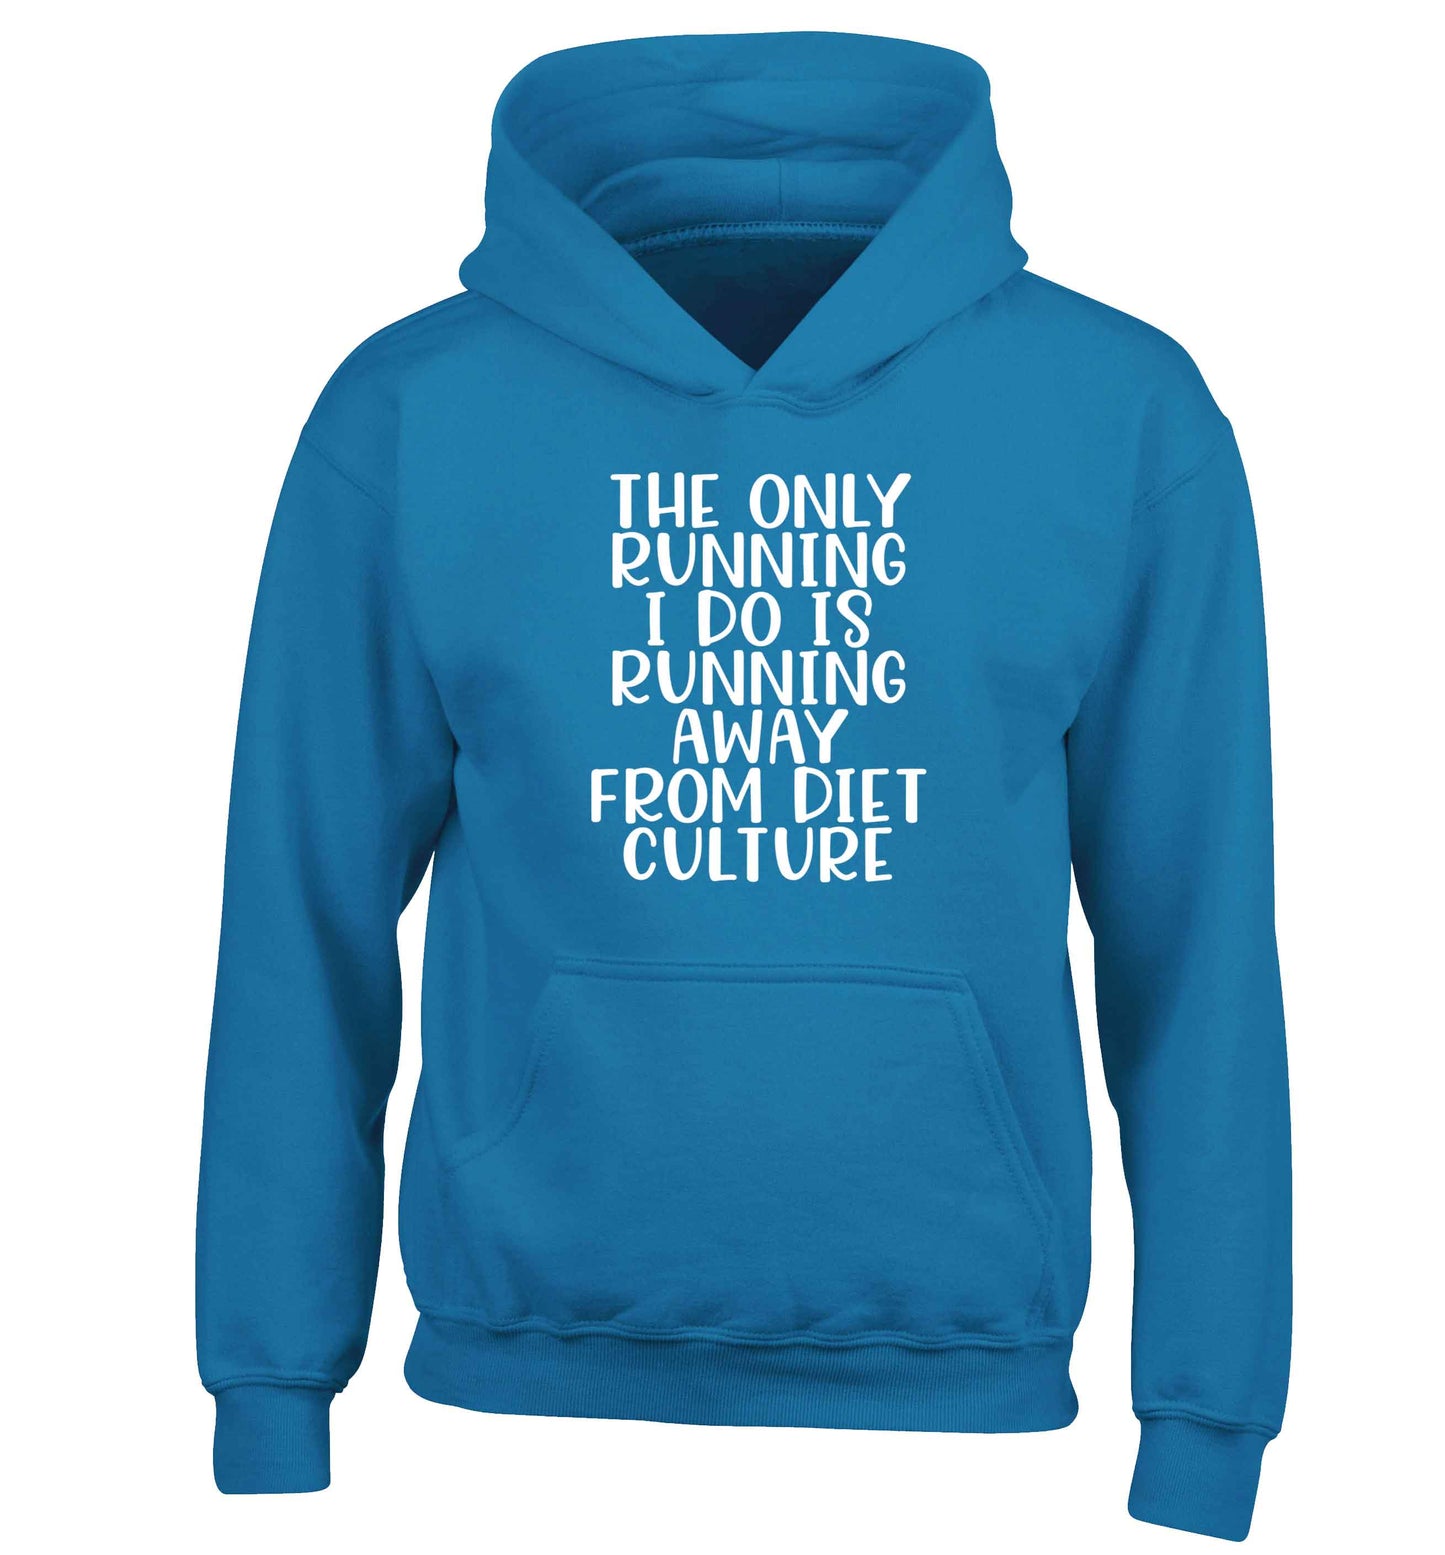 The only running I do is running away from diet culture children's blue hoodie 12-13 Years